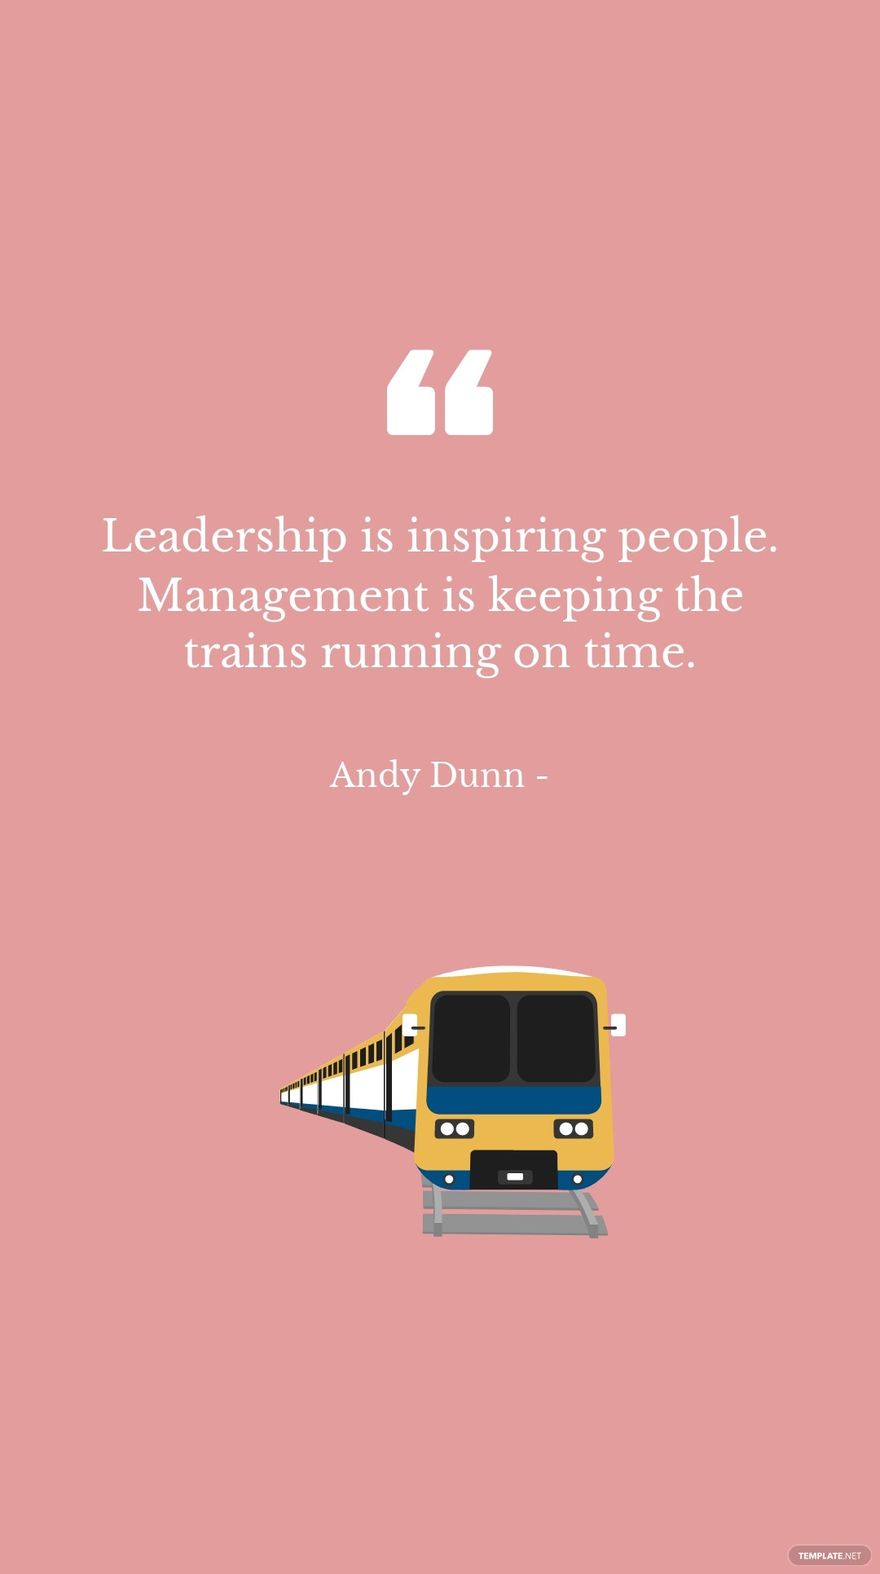 Andy Dunn - Leadership is inspiring people. Management is keeping the trains running on time.